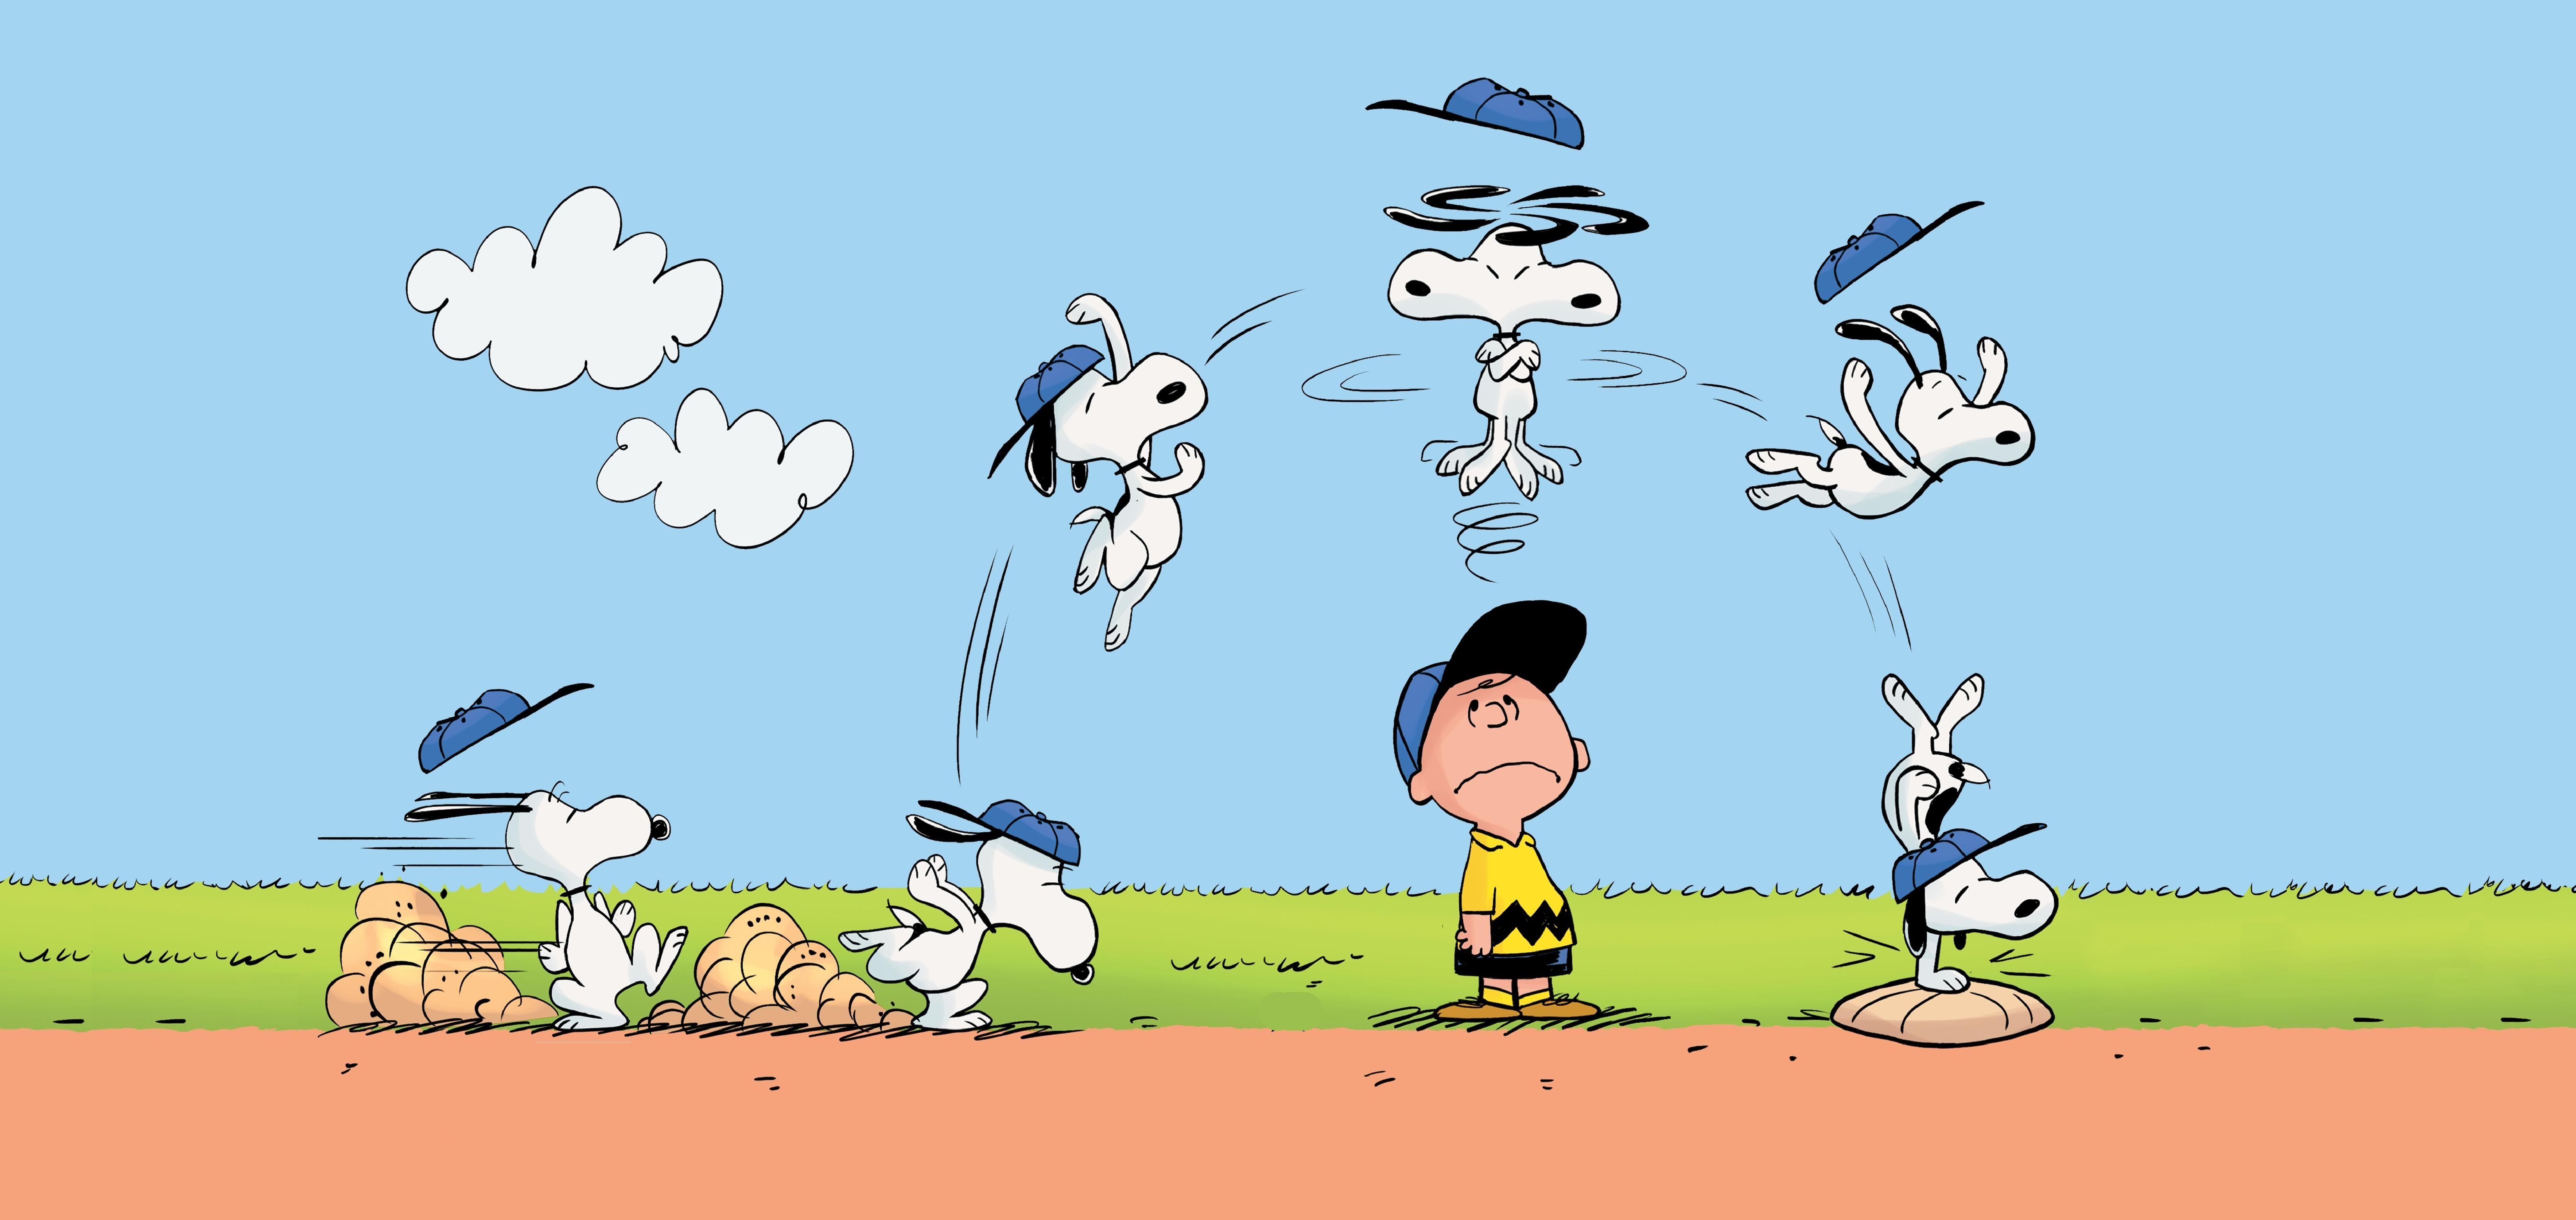 Peanuts image Charlie Brown and Snoopy HD wallpaper and background